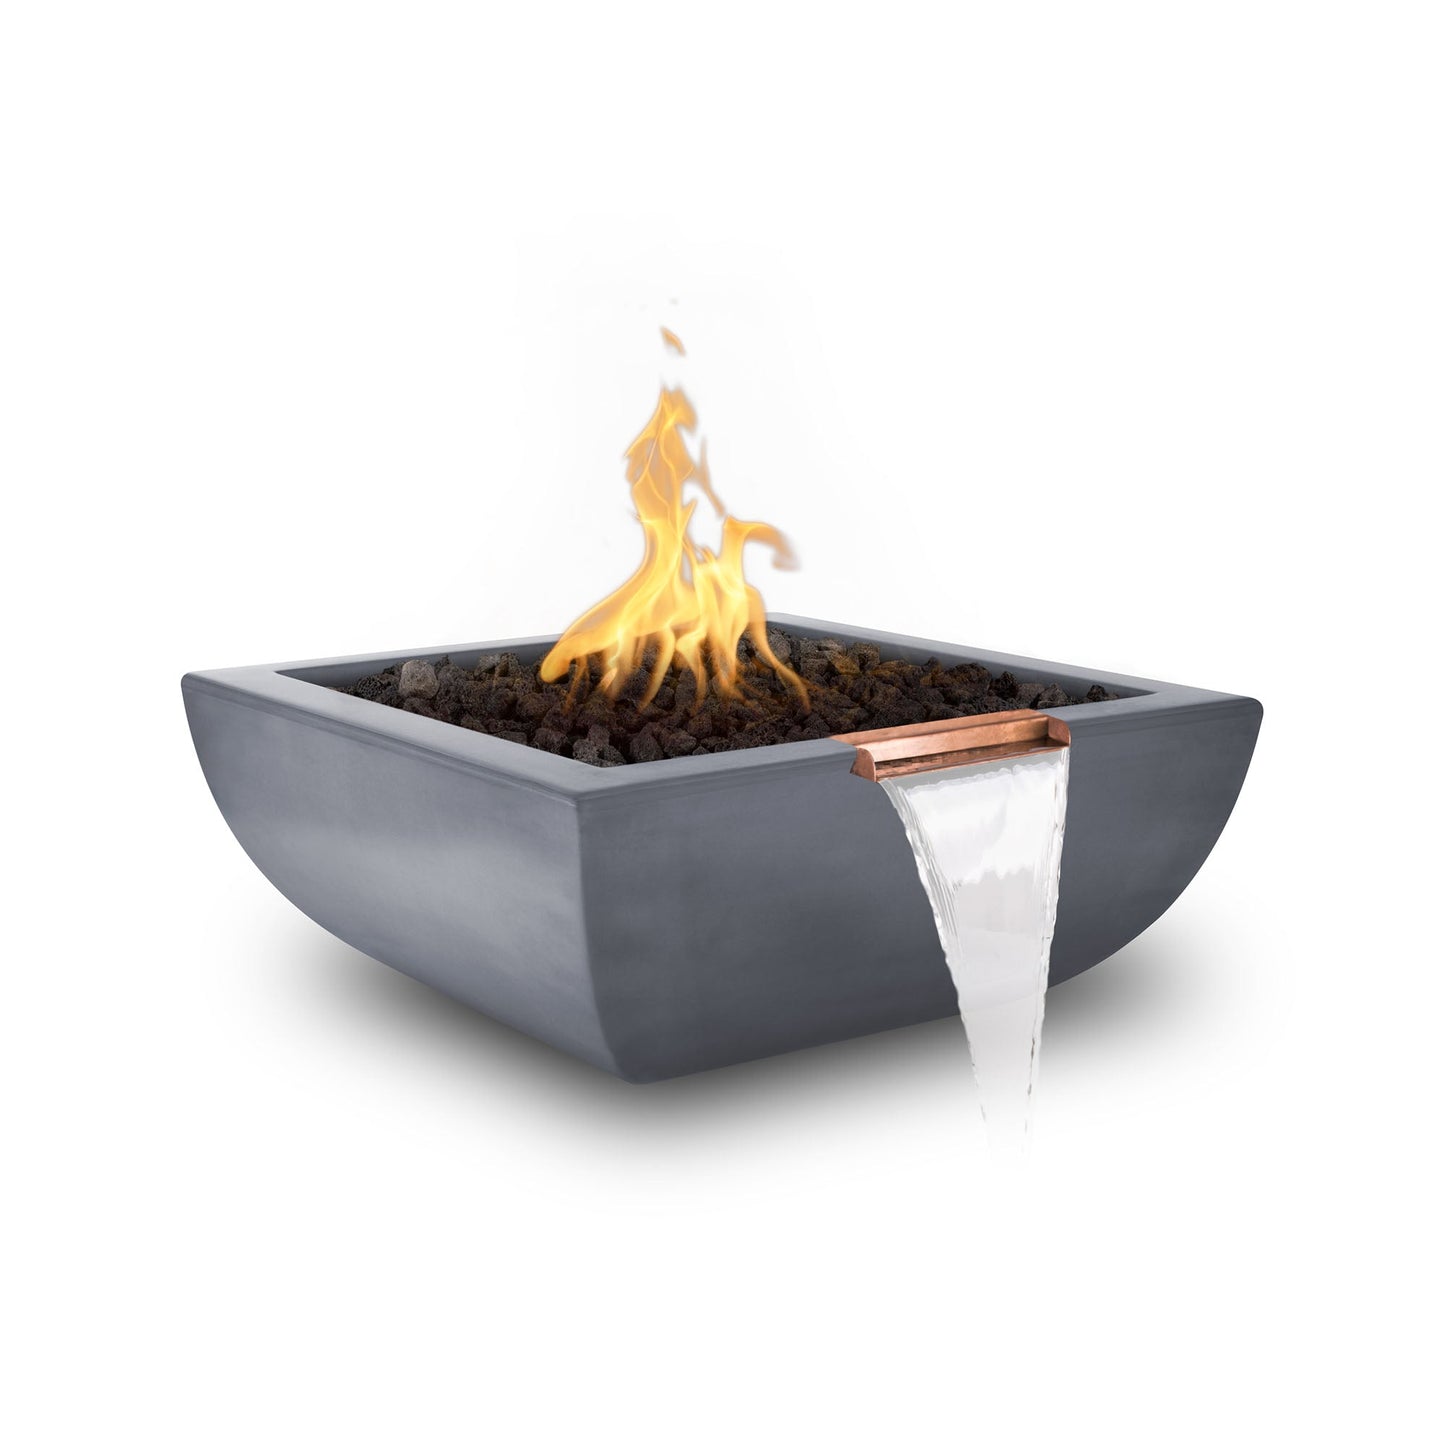 The Outdoor Plus Square Avalon 36" Vanilla GFRC Concrete Liquid Propane Fire & Water Bowl with Match Lit with Flame Sense Ignition